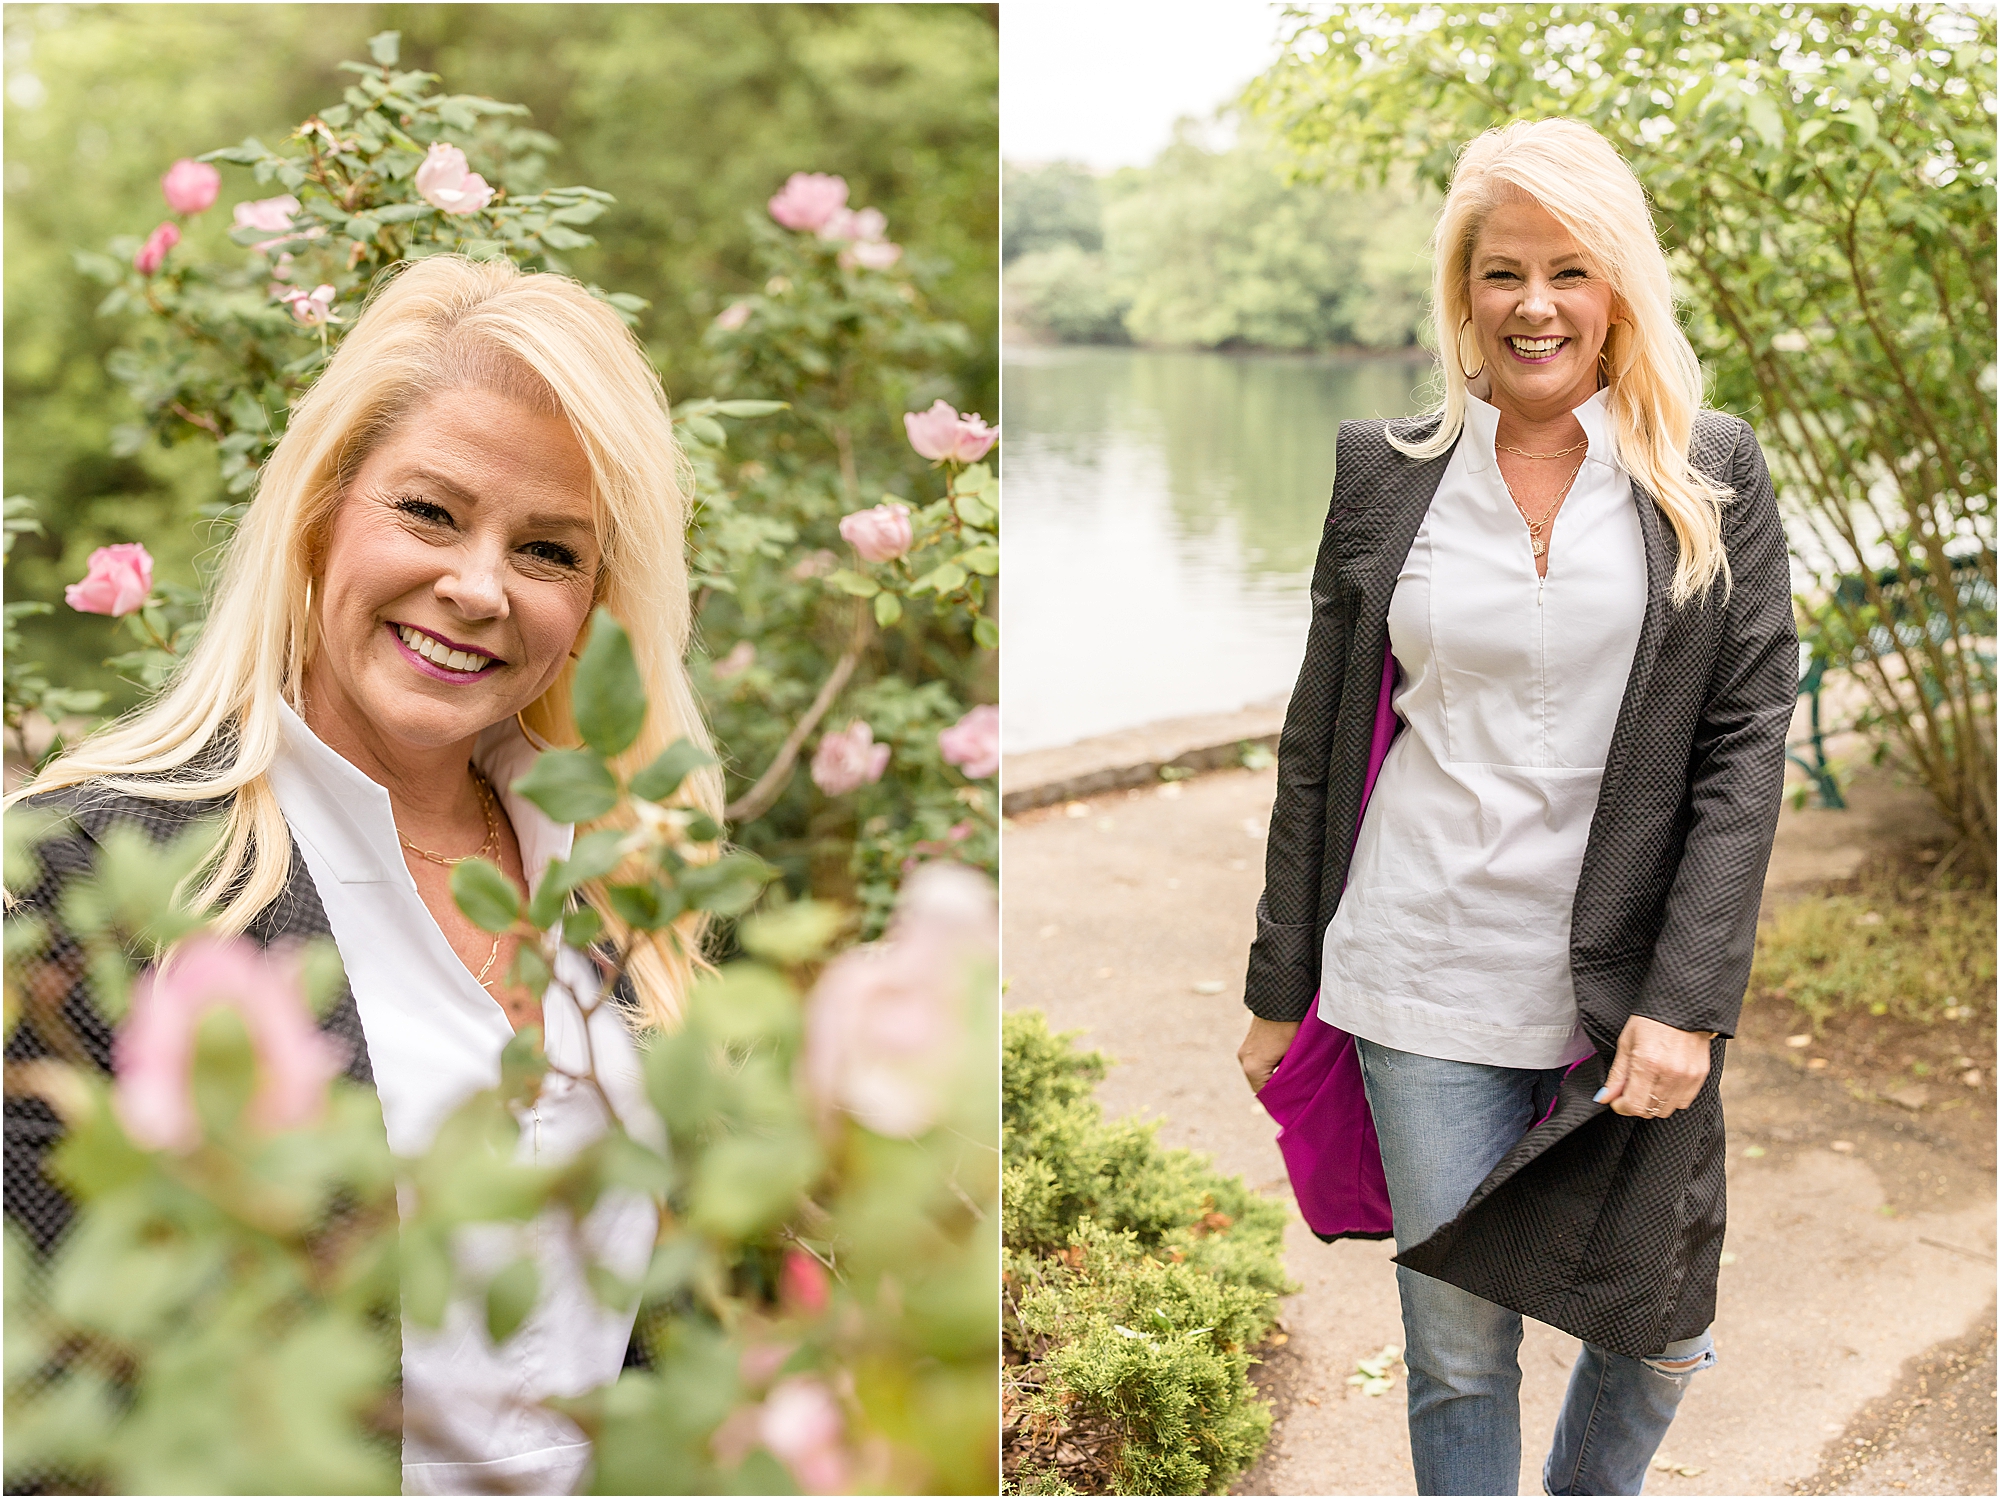 The client is standing on the walkway in front of the pond with beautiful flowering trees. She is dressed in a white shirt, blue jeans, and a long black jacket lined in hot pink.